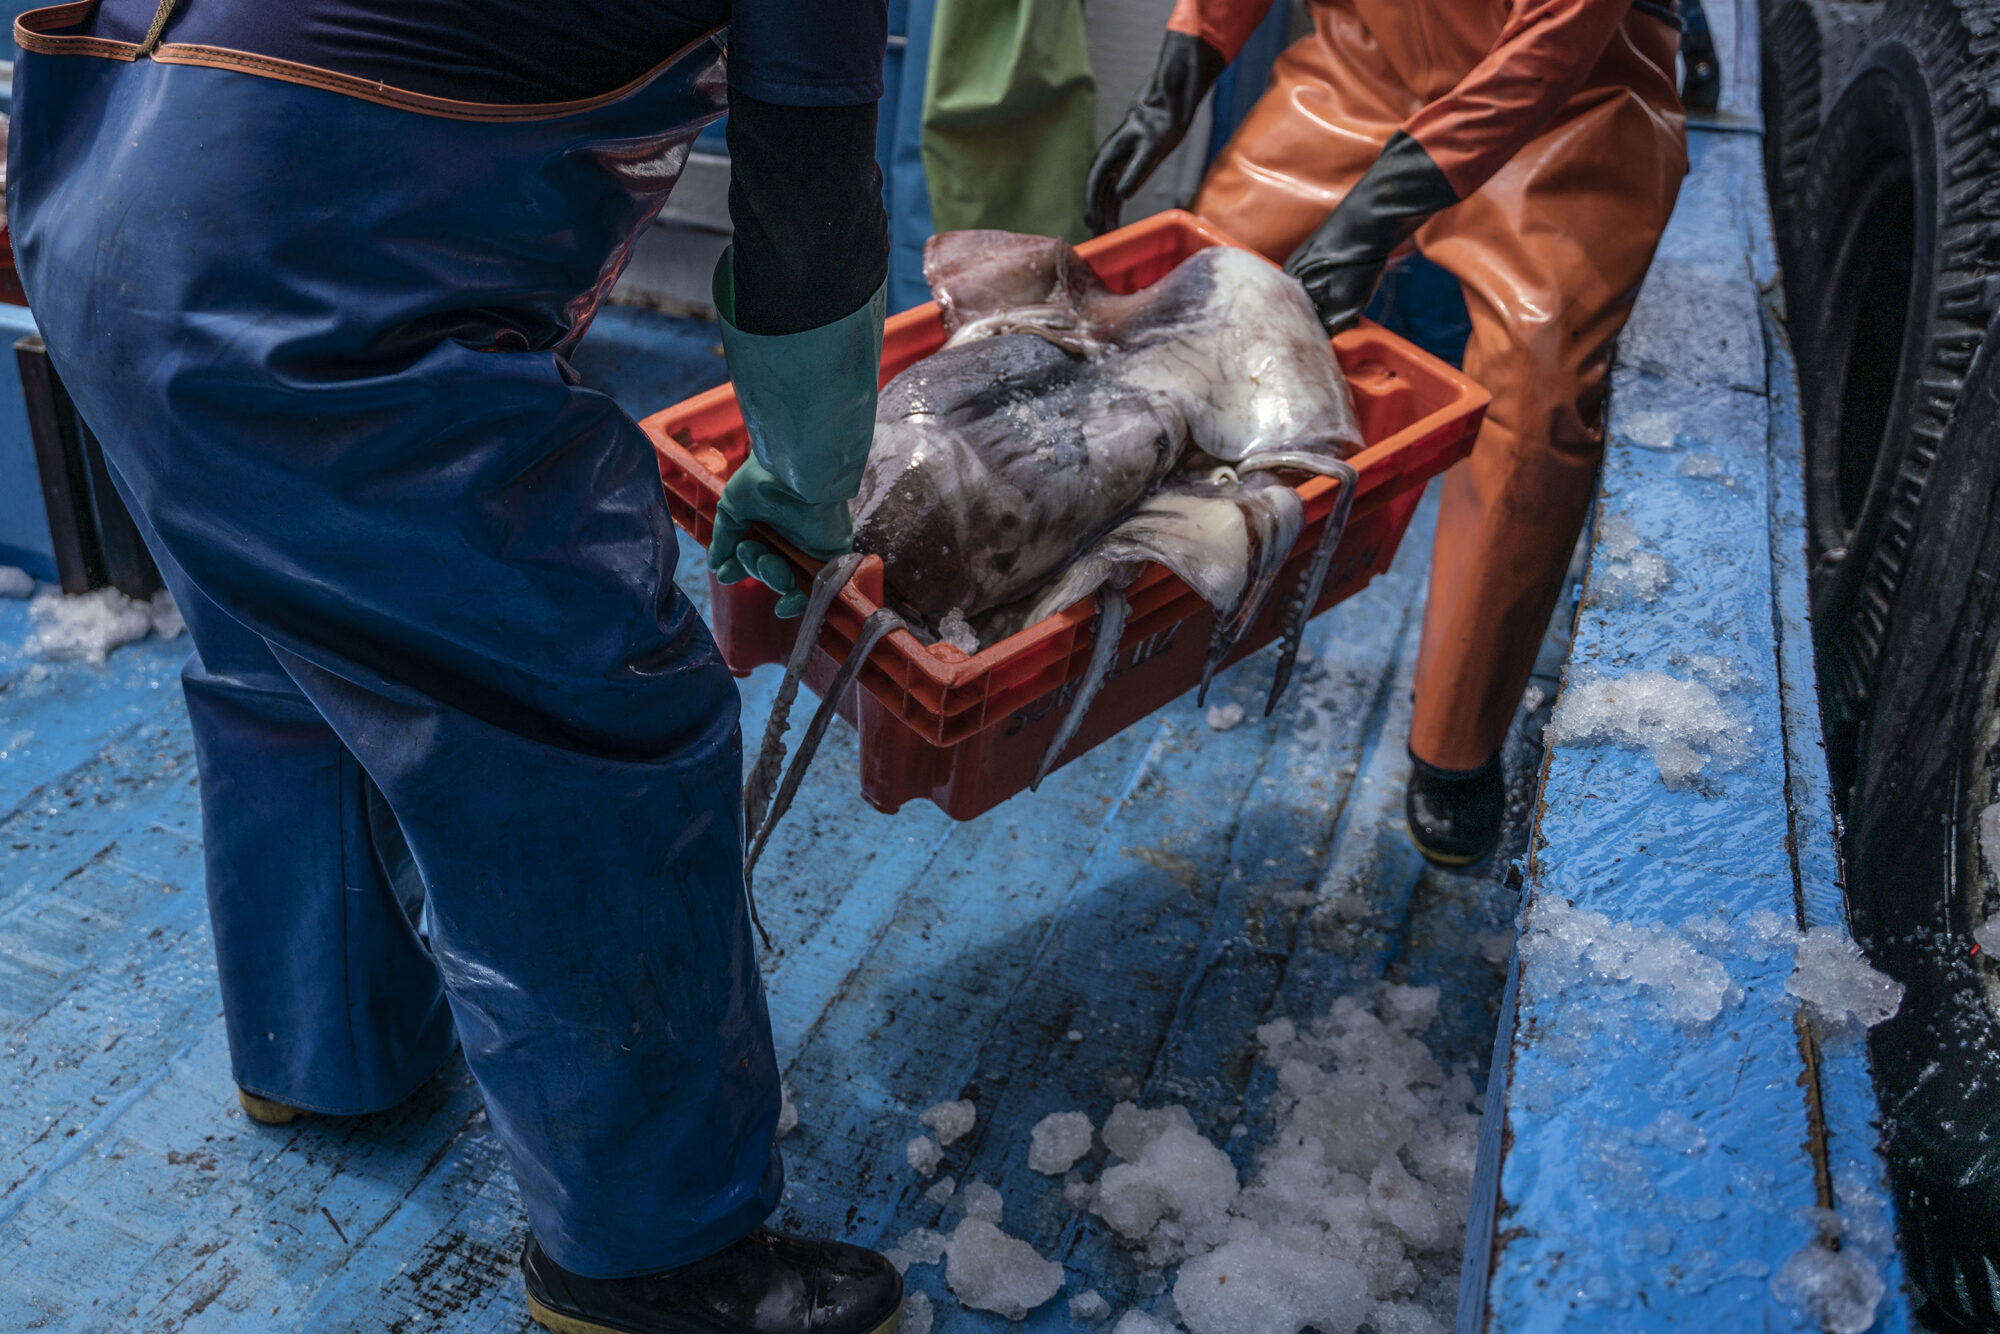 <p>Local fishers unload squid, or <em>pota</em>, at the port of Paita in northern Peru. <em>Pota</em> is an important export for the country, but fishers in the region have seen their catches increasingly threatened by illegal and unregulated vessels operating in the waters of the southeast Pacific, raising concerns over the sustainability of squid numbers in the region. (Image: Leslie Moreno Custodio)</p>